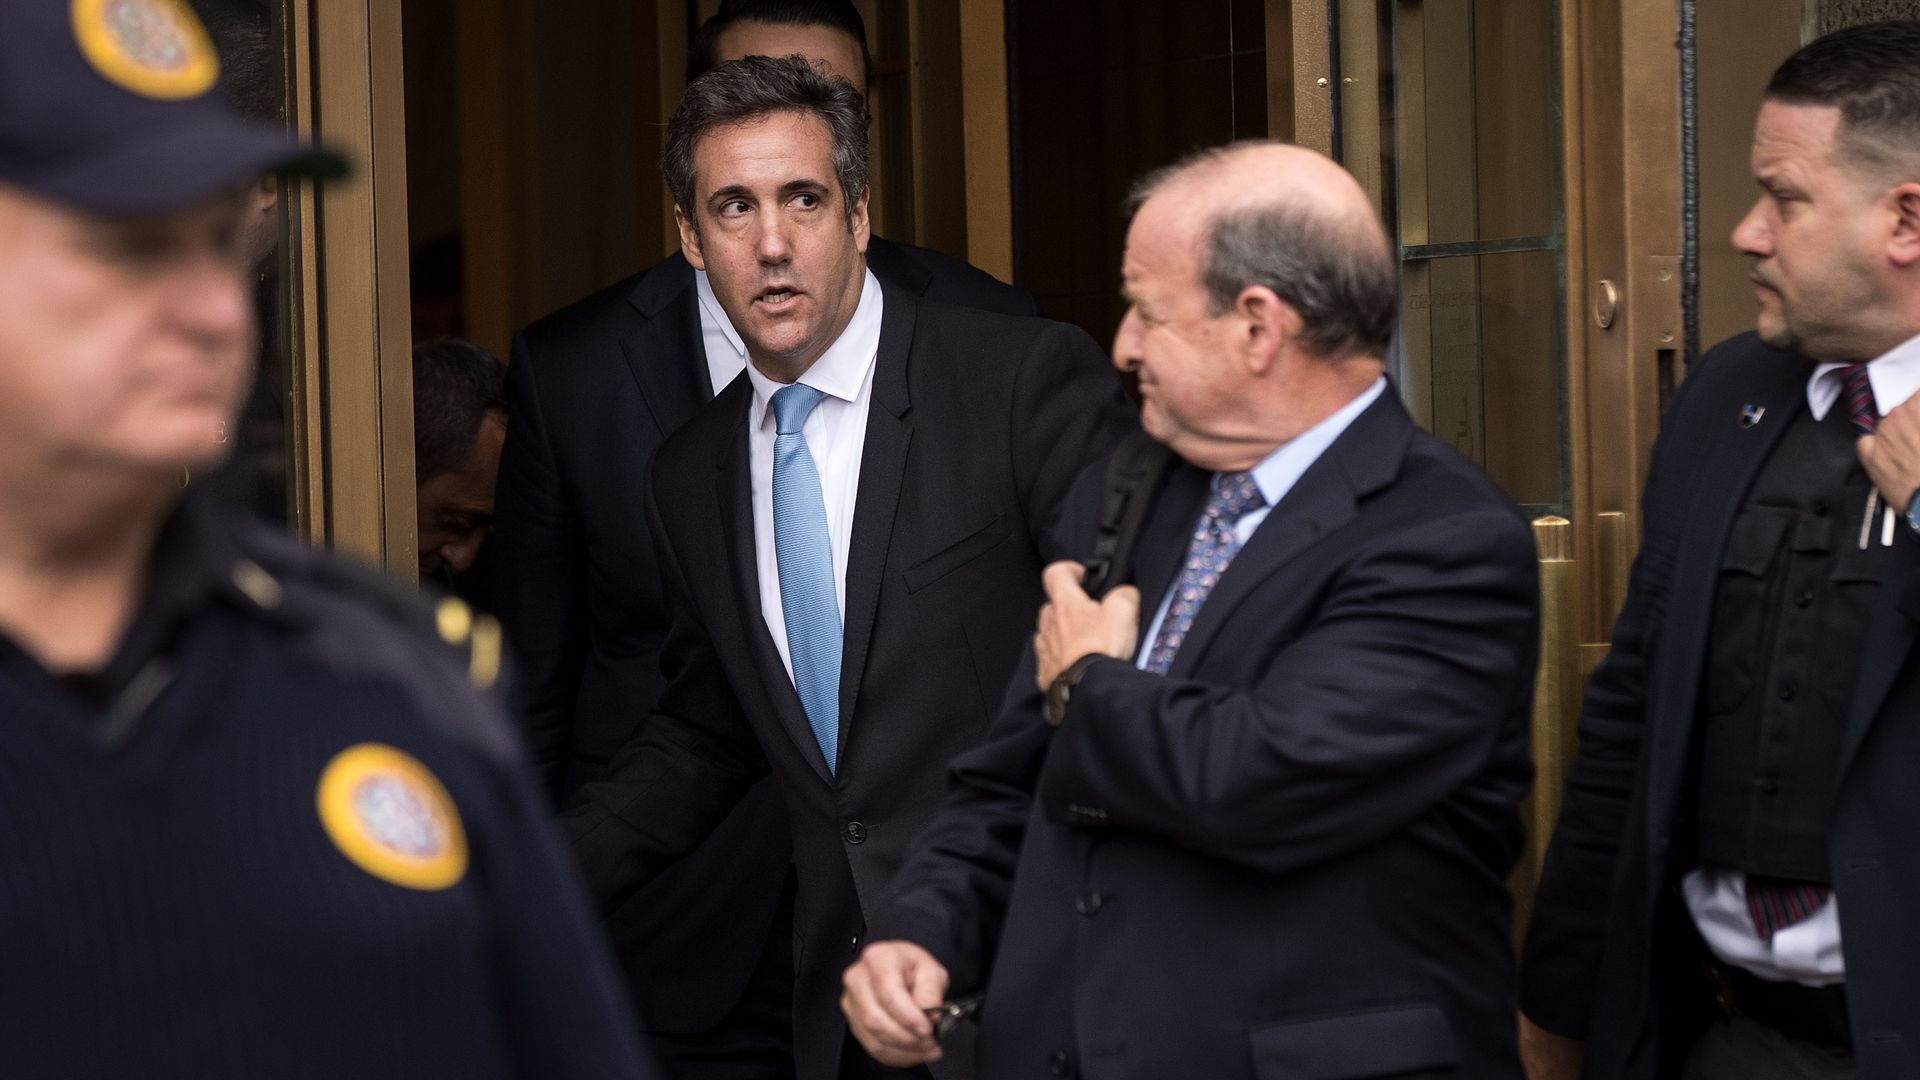  Michael Cohen, longtime personal lawyer and confidante for President Donald Trump, exits the United States District Court Southern District of New York